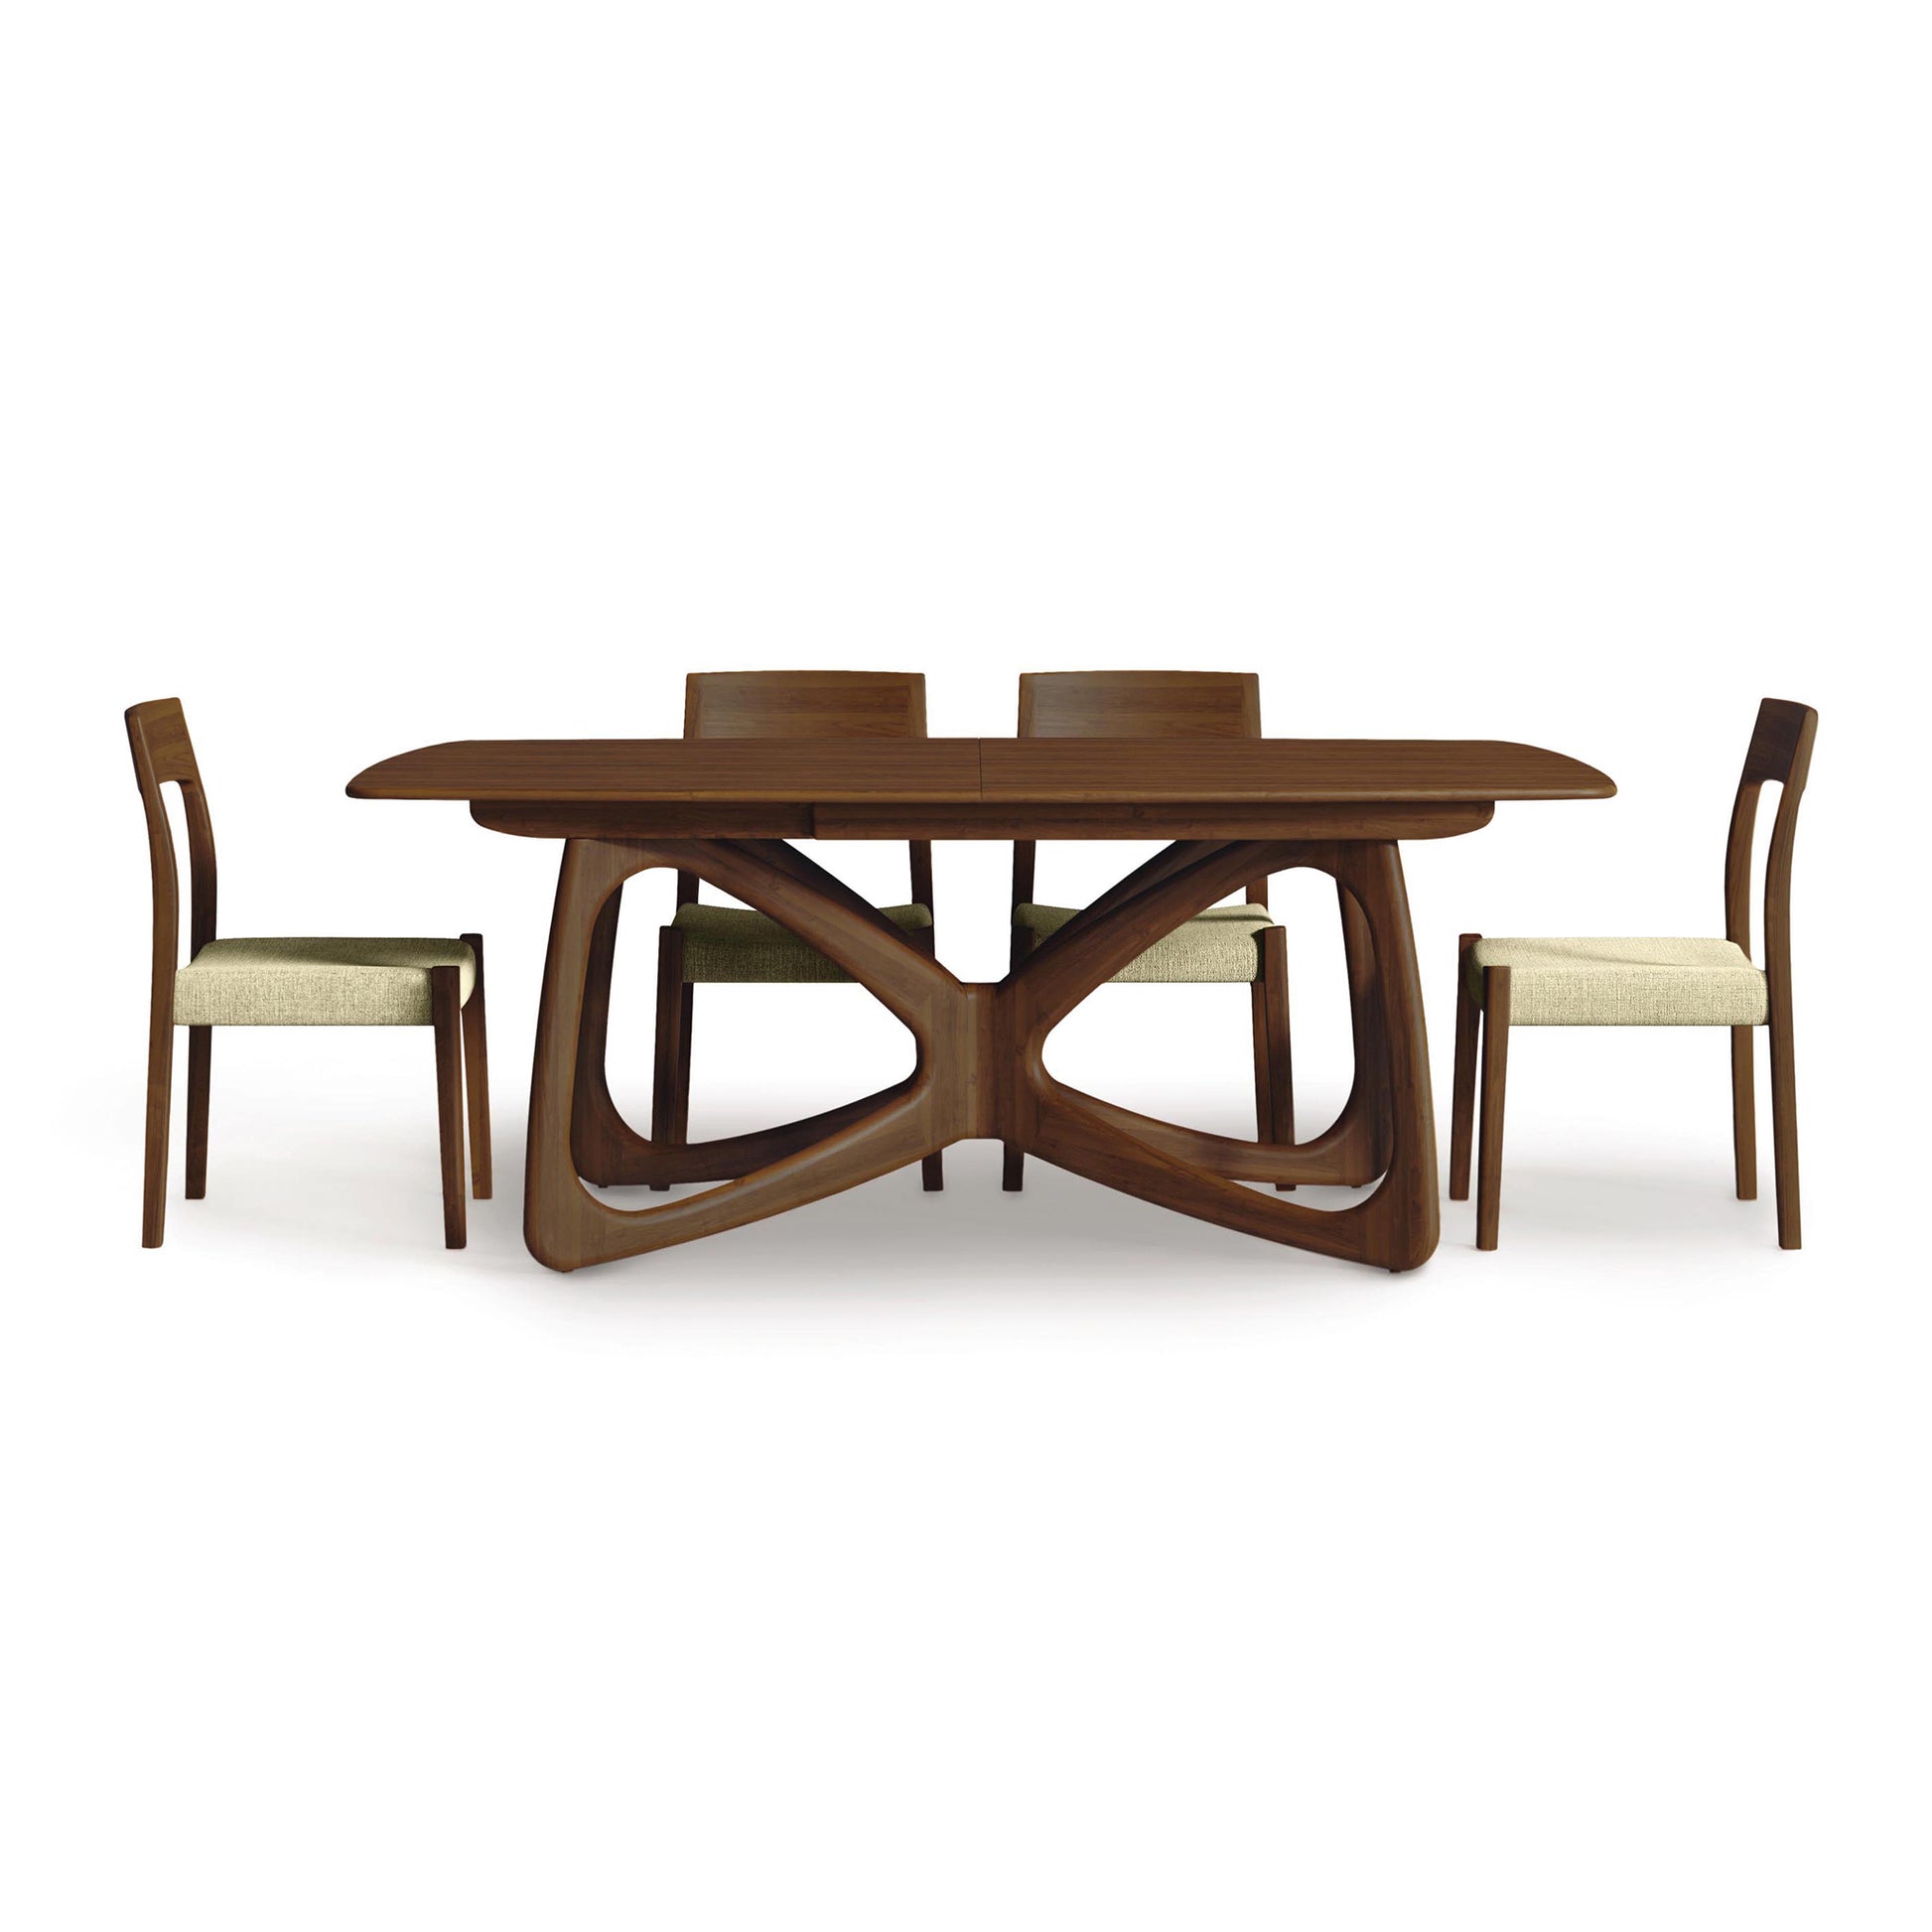 Alt text optimized for SEO: "Modern Butterfly Extension Dining Table by Copeland Furniture featuring unique geometric base, sustainably sourced hardwood, paired with four matching light-colored upholstered chairs. Sleek, contemporary solid wood dining set for American made furniture lovers.